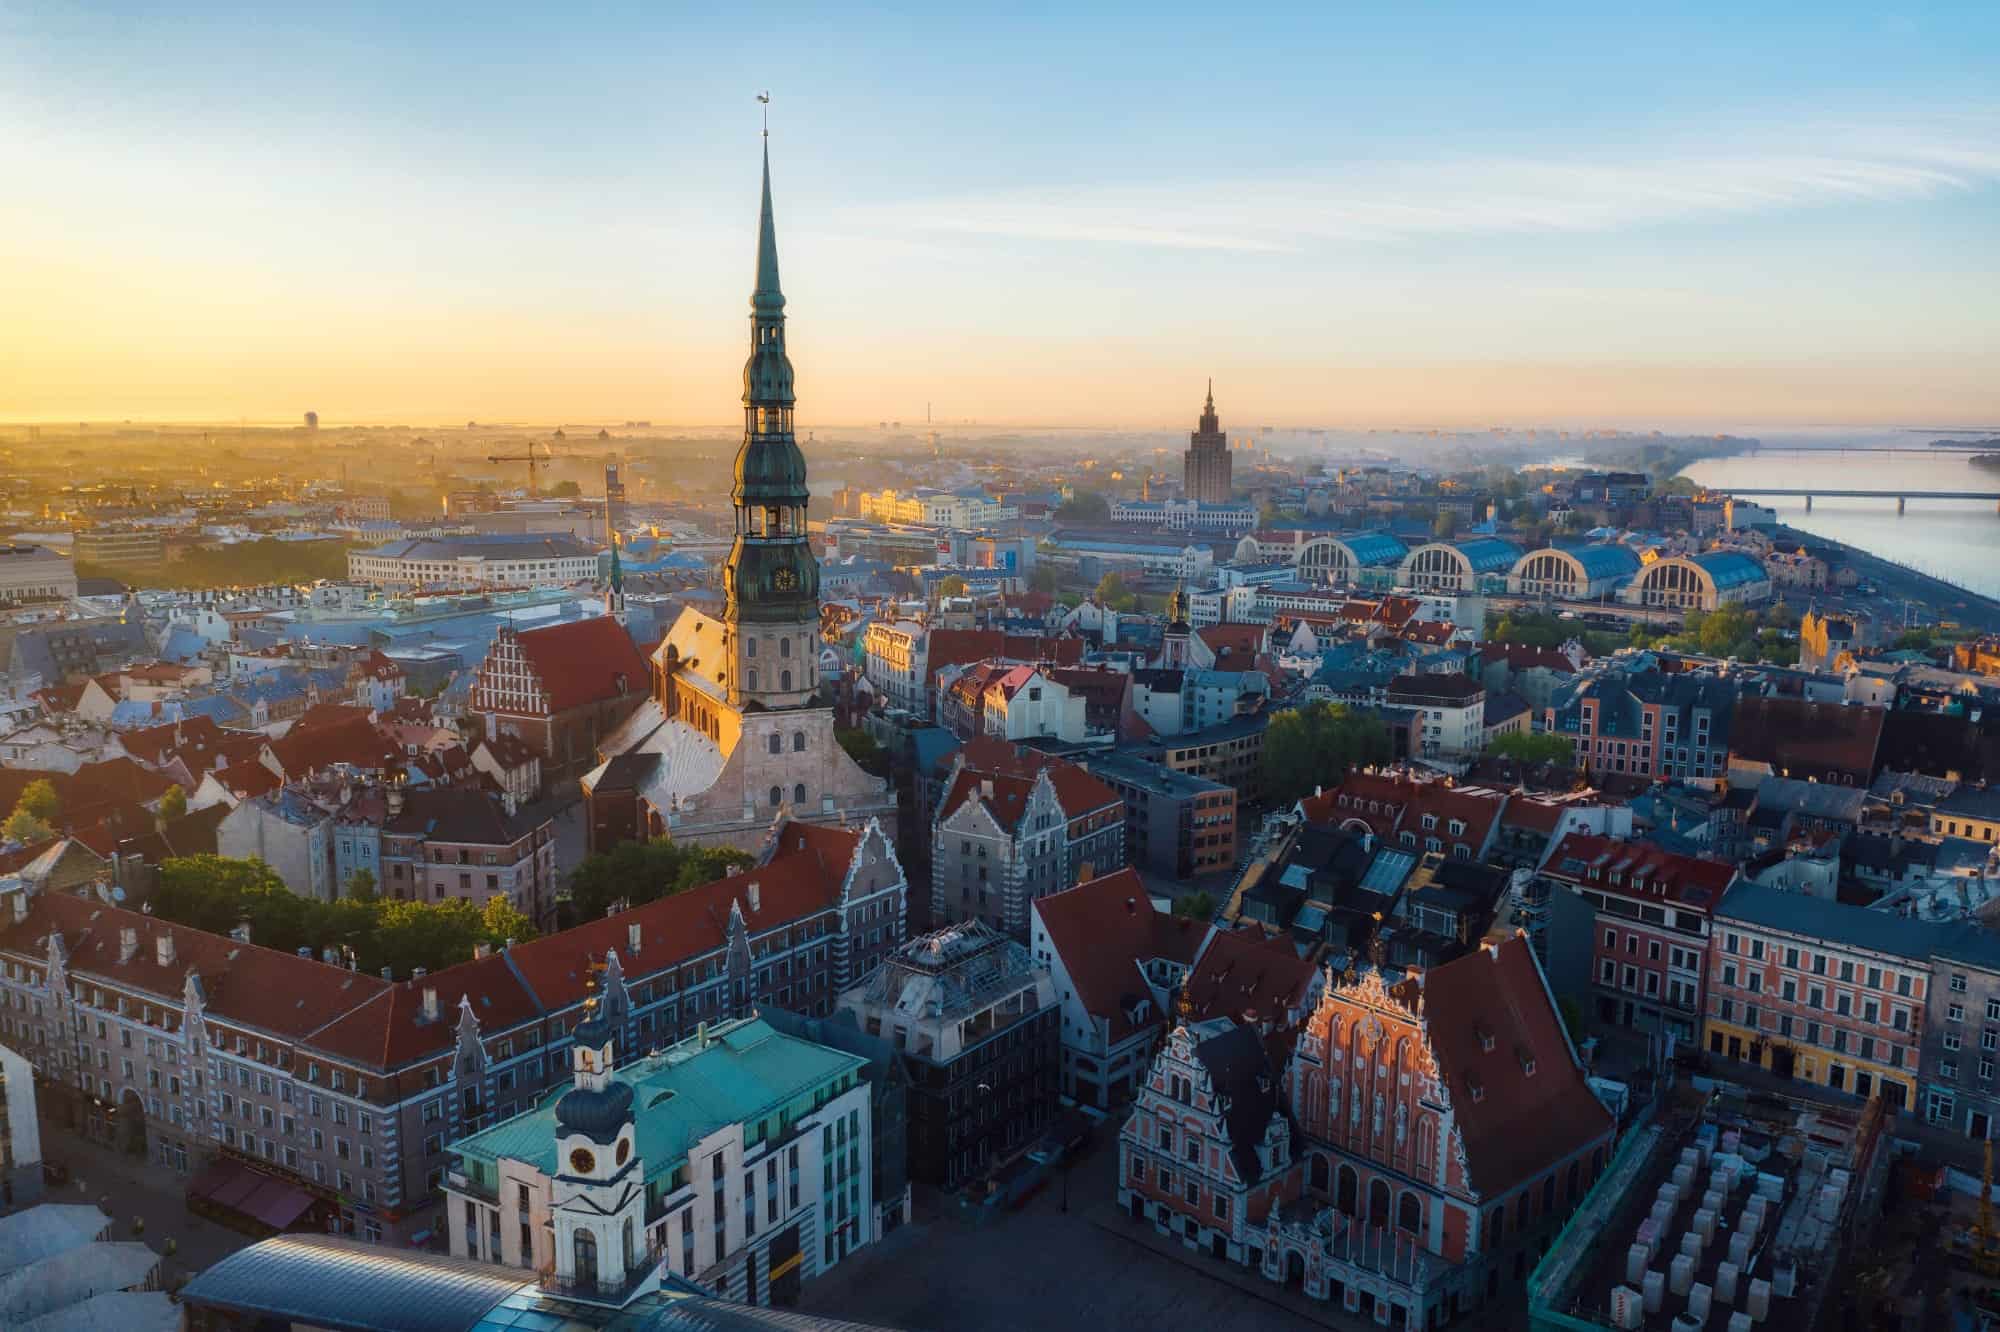 Aerial view of downtown Riga, in Latvia, at sunrise. Foreground is dominated by a large church spire. River visible in the distance.